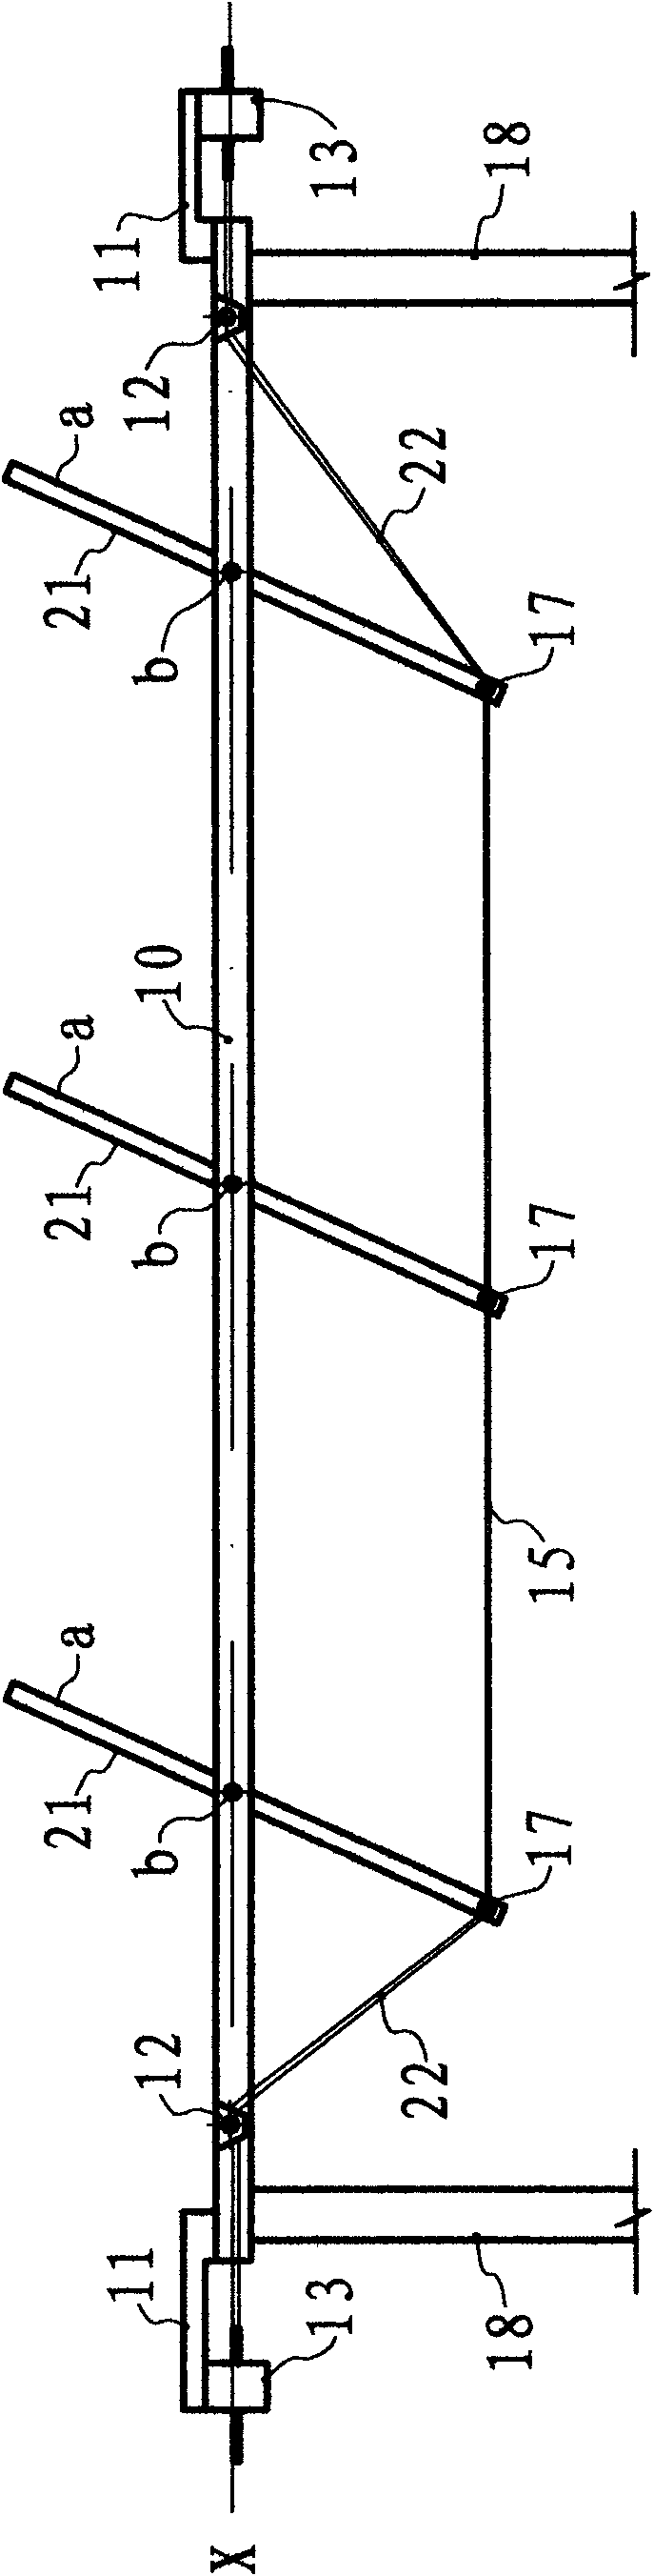 Connecting rod connecting method for solar panel to evade rain and snow